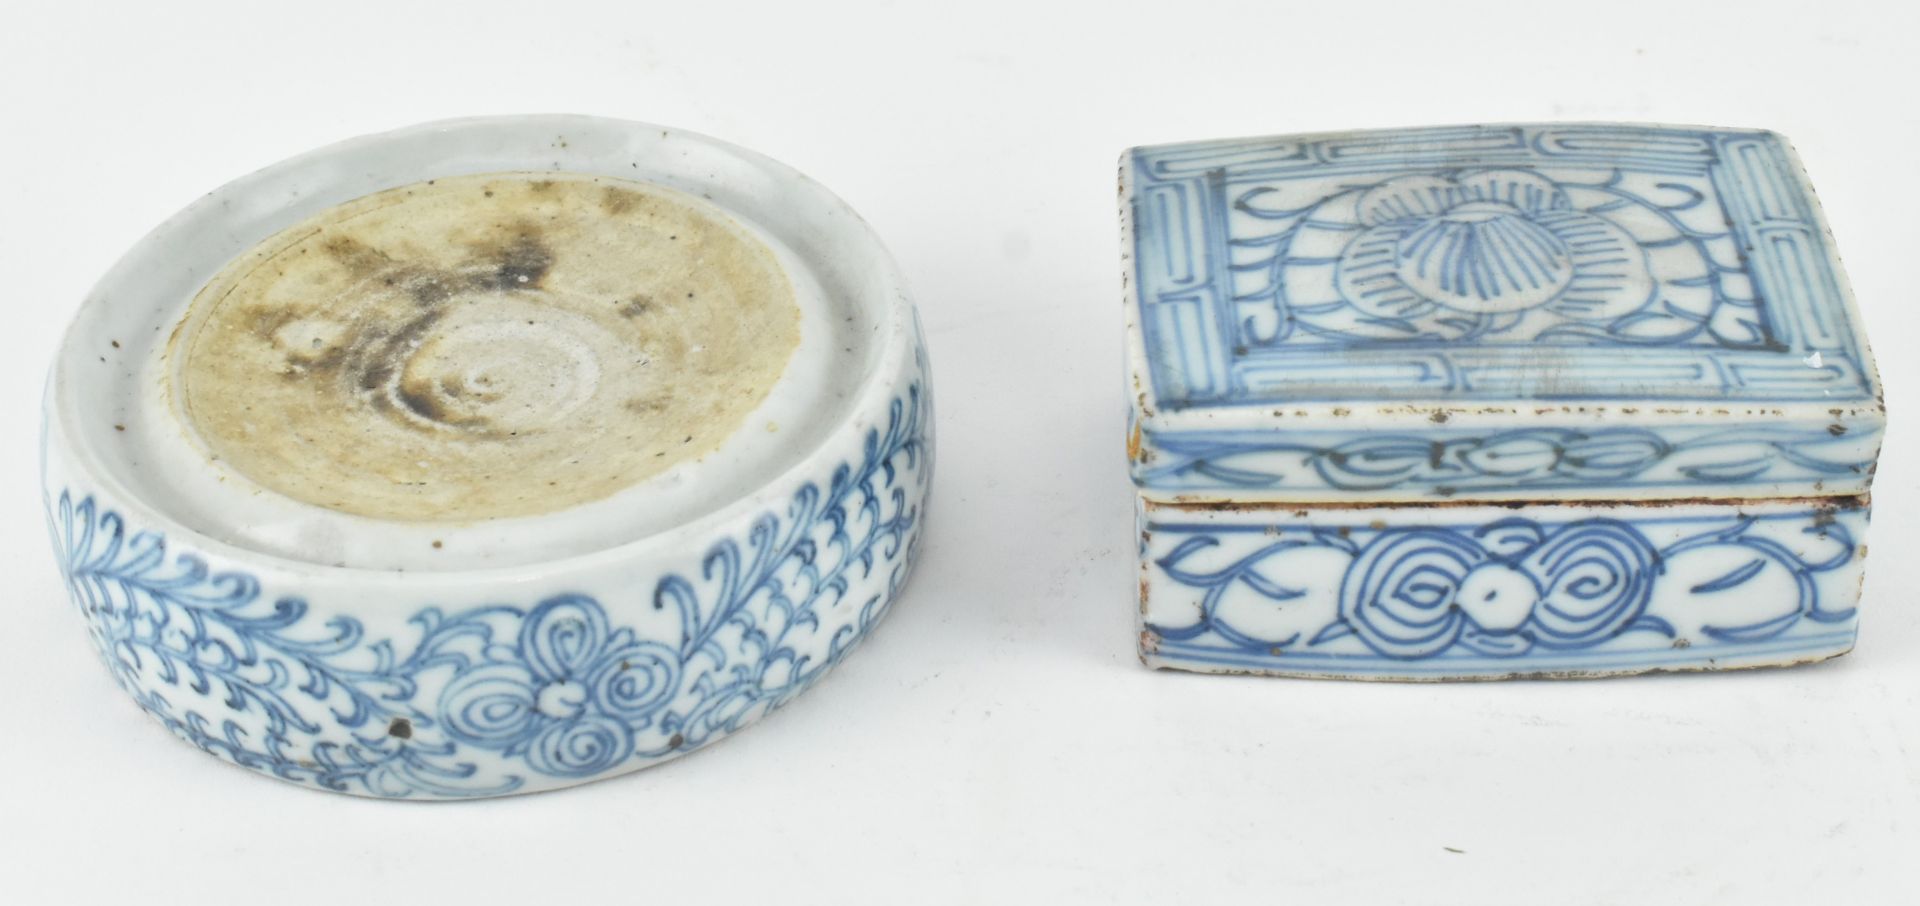 QING DYNASTY INK WELL AND SEAL PASTE BOX 清 青花烟台和印泥盒 - Image 2 of 6